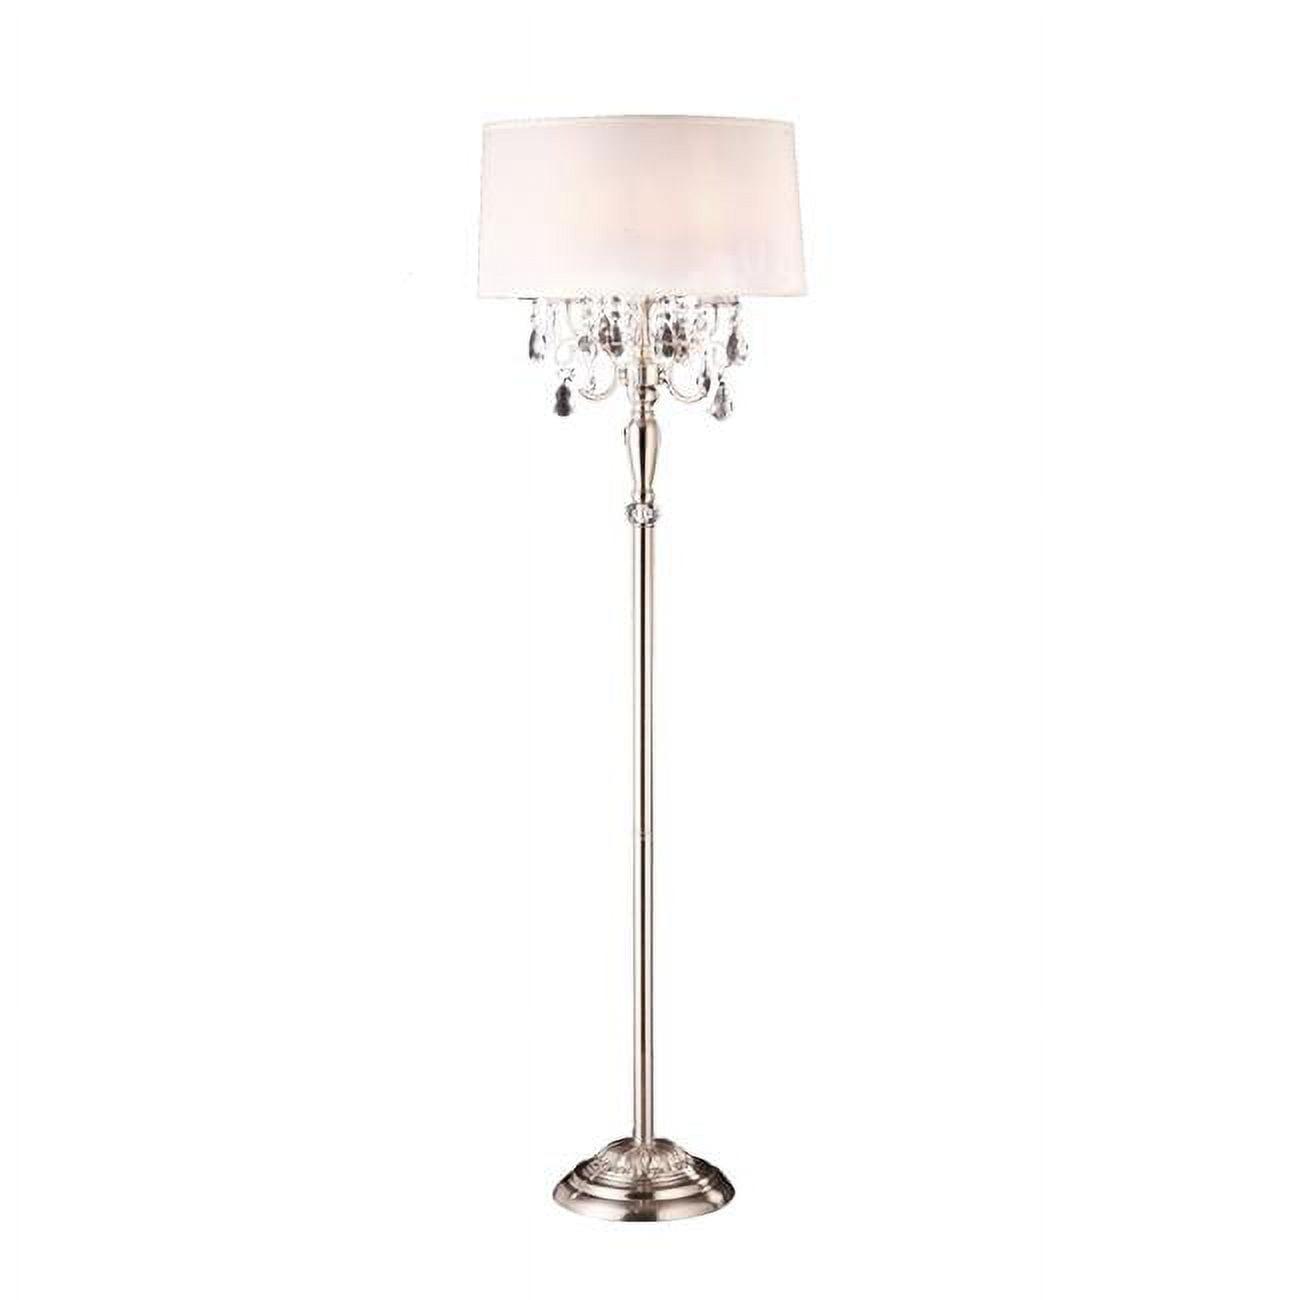 Stalk Glamour Adjustable Silver Metal Floor Lamp with Crystal Accents